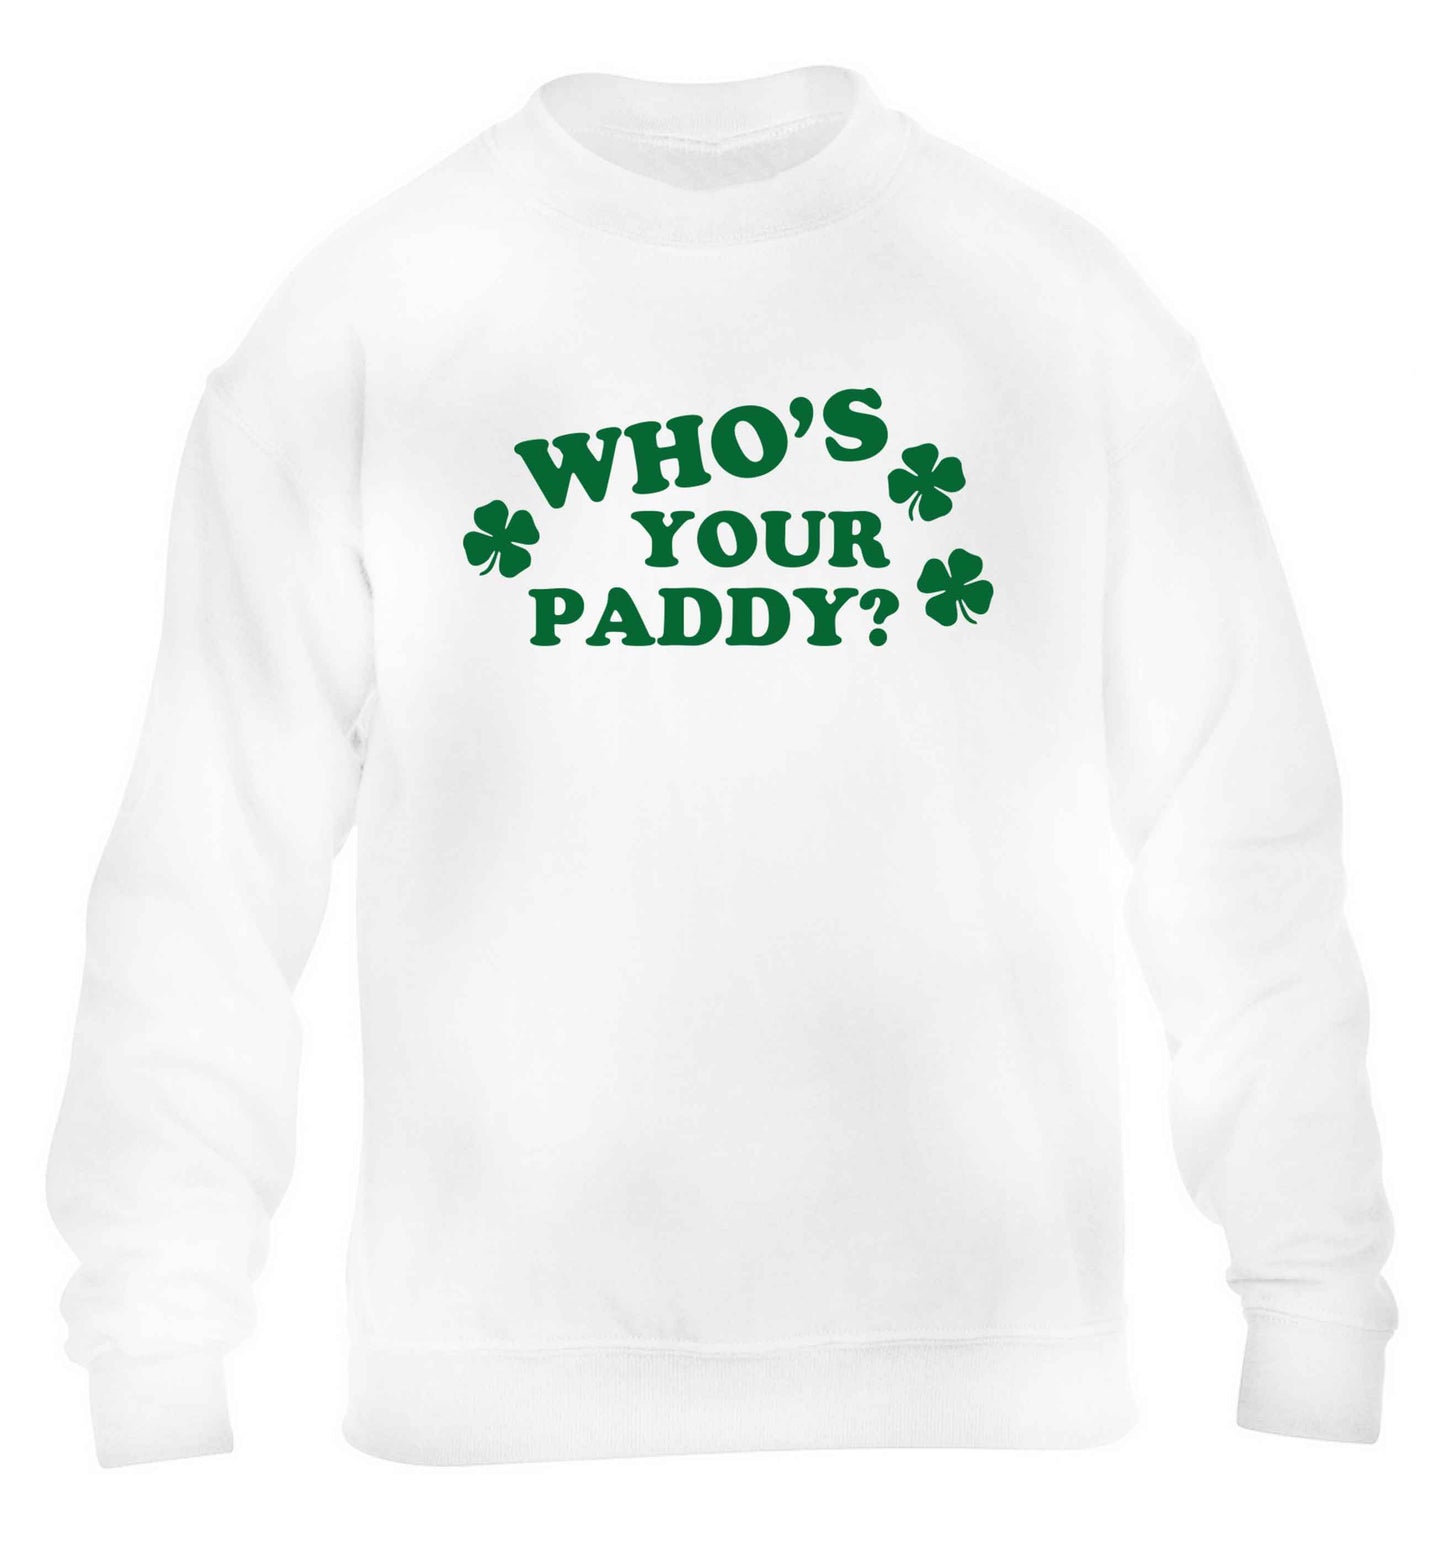 Who's your paddy? children's white sweater 12-13 Years